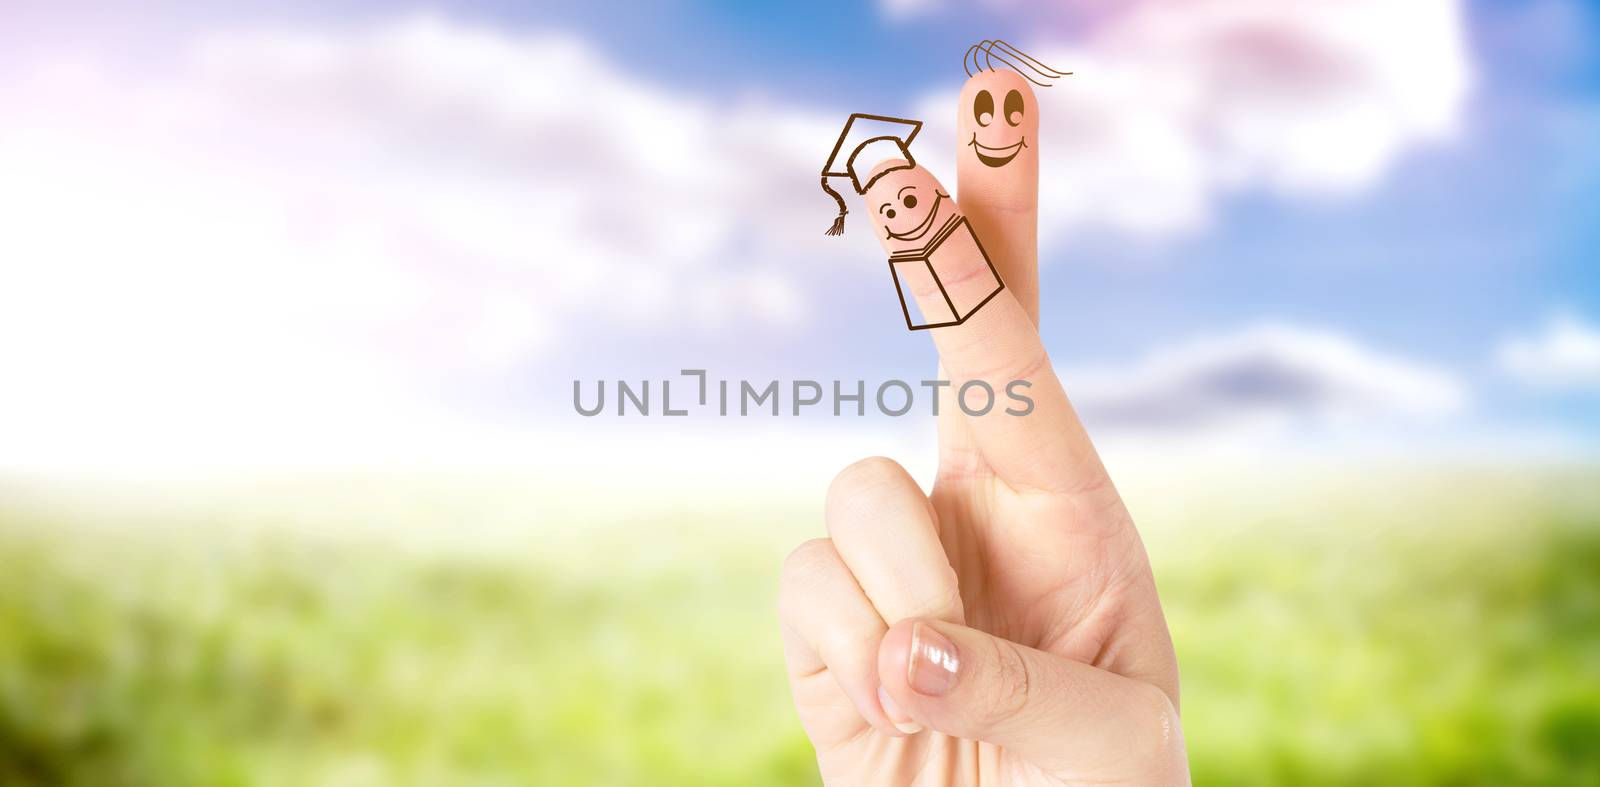 Fingers posed as students against sunny landscape